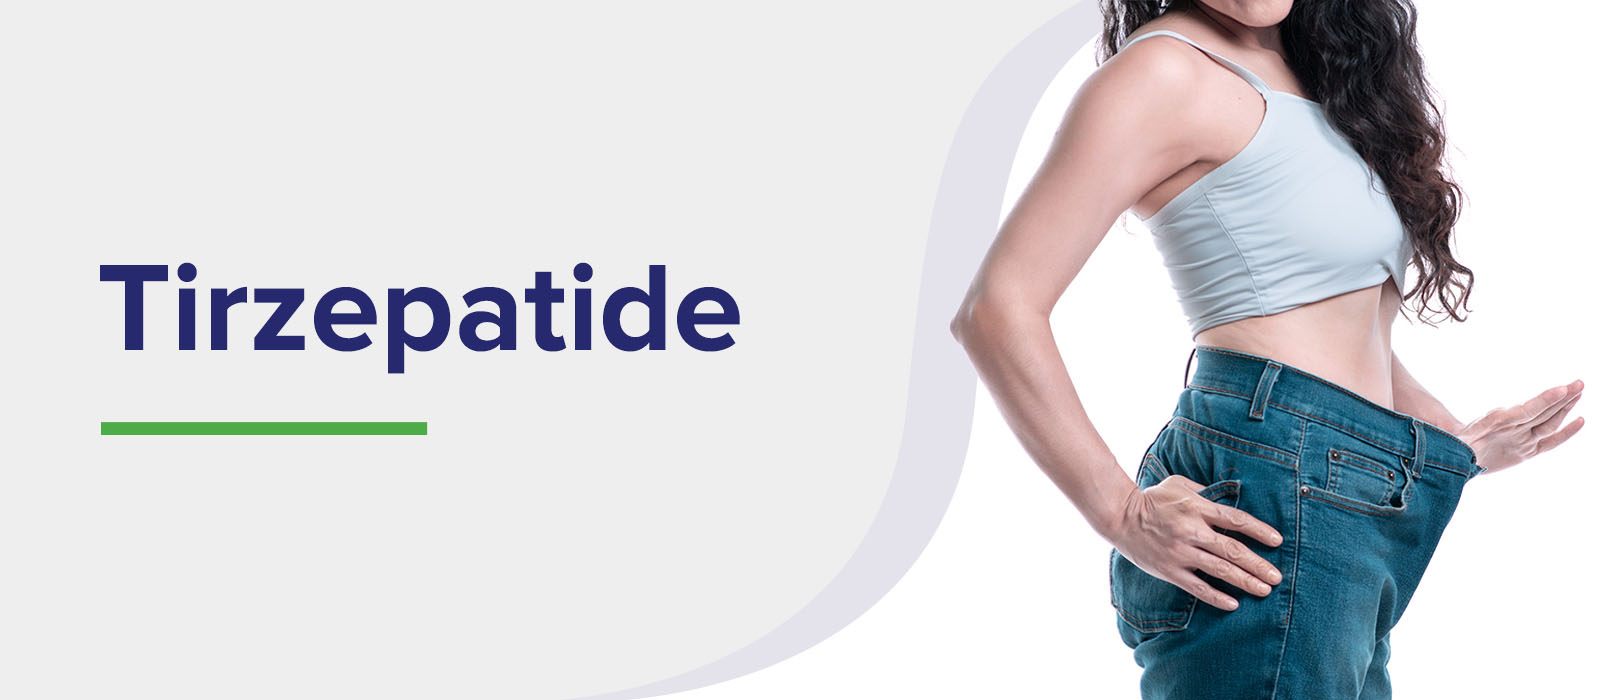 tirzepatide for weight loss